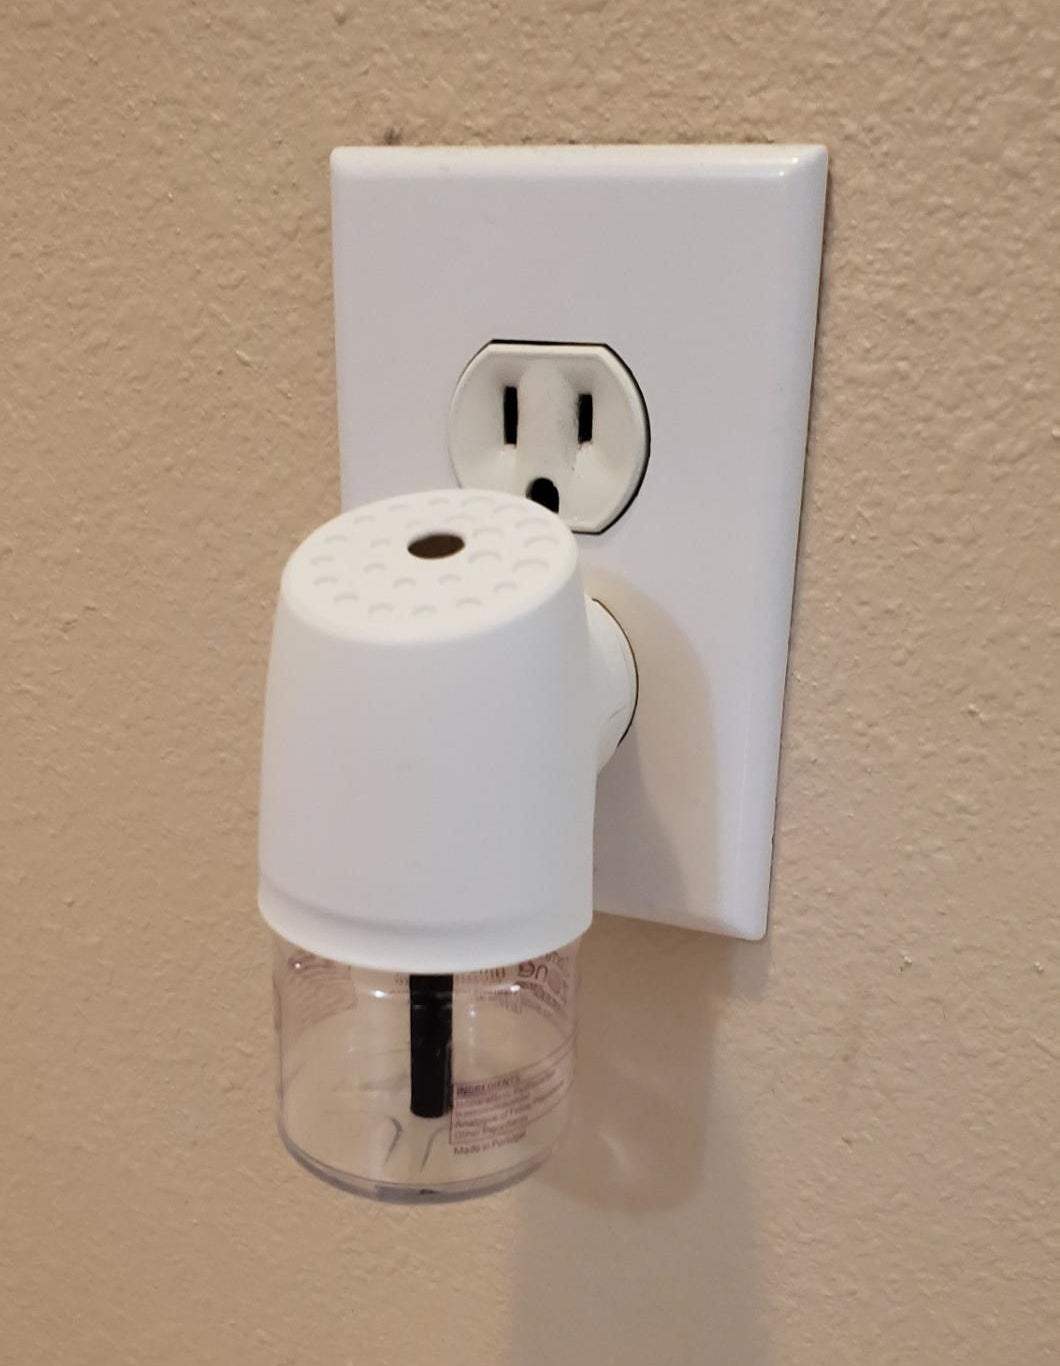 The diffuser, which plugs directly into a wall socket